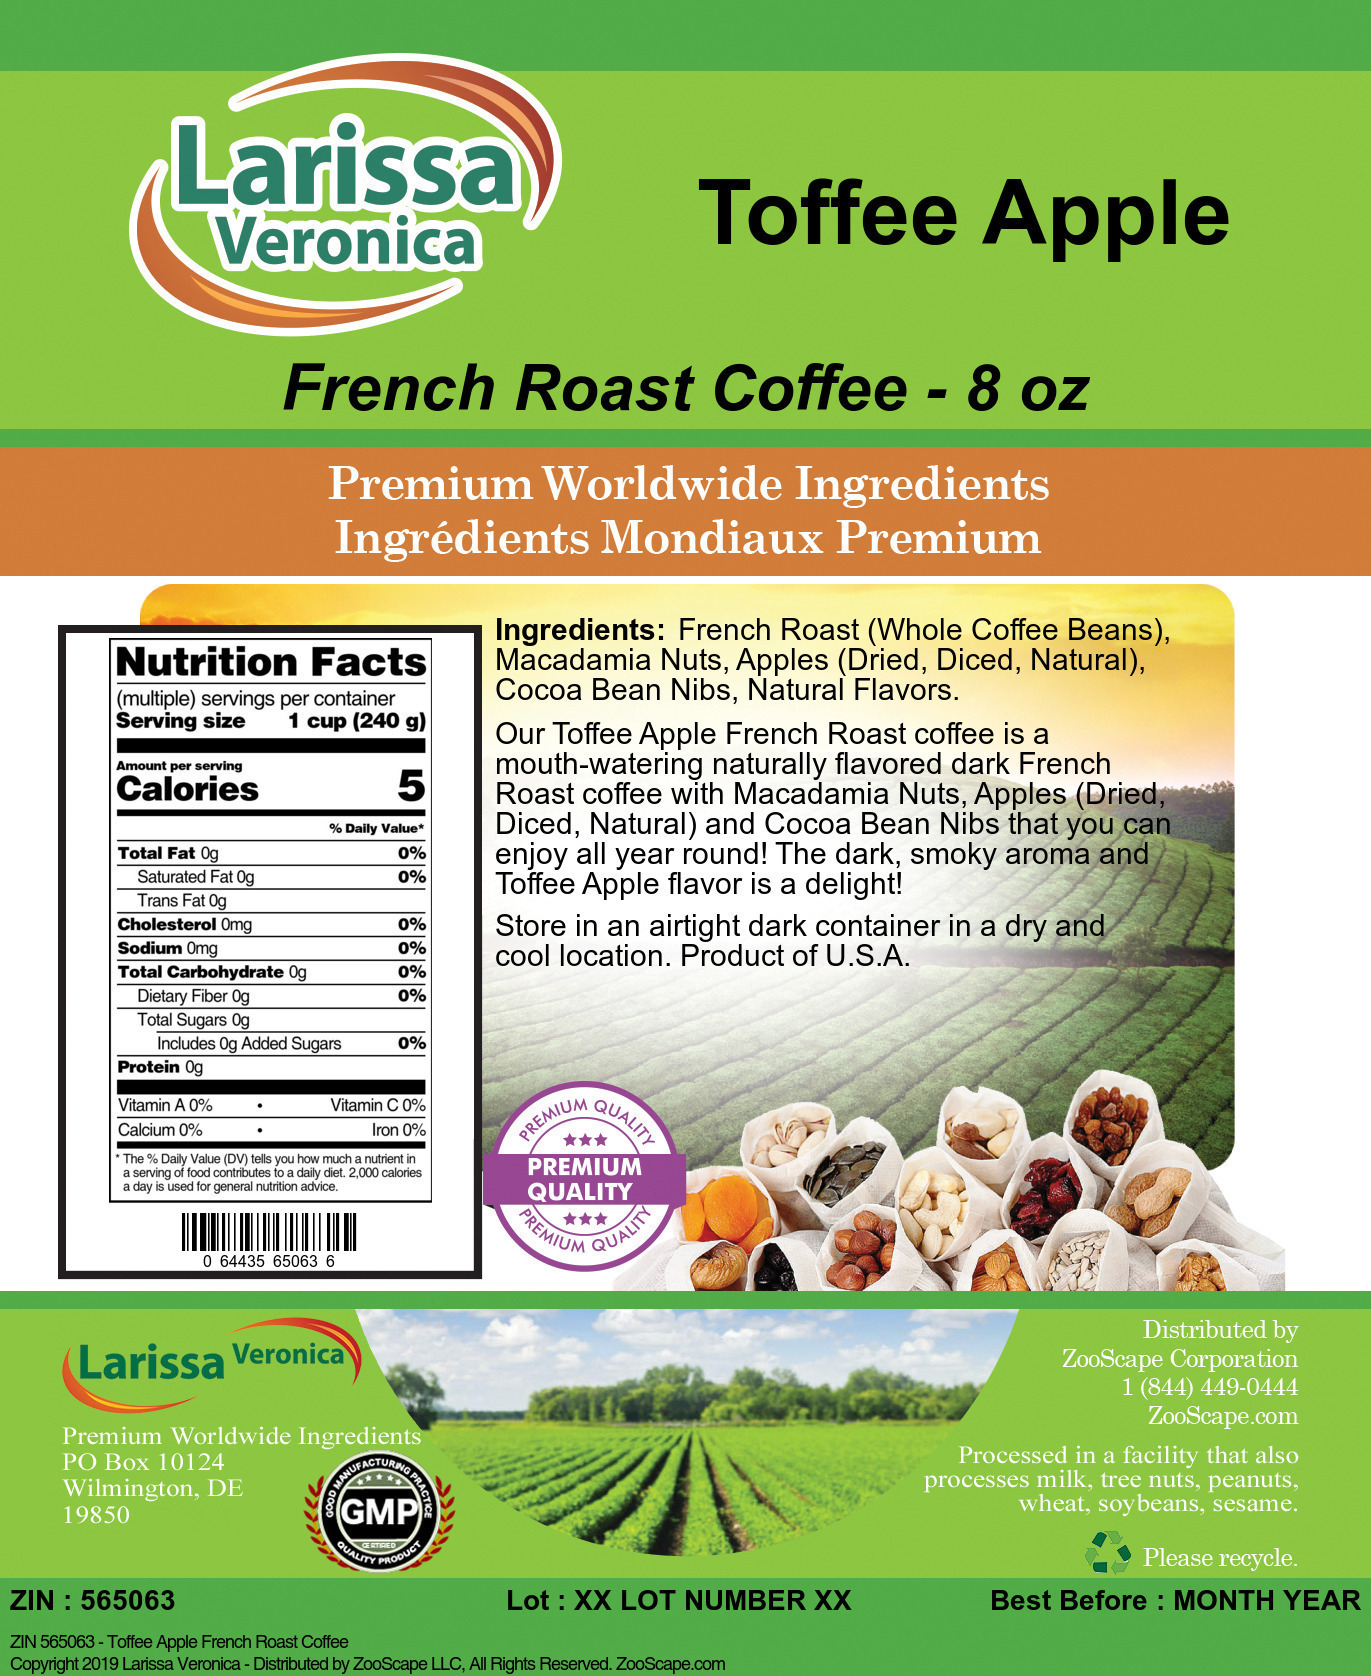 Toffee Apple French Roast Coffee - Label